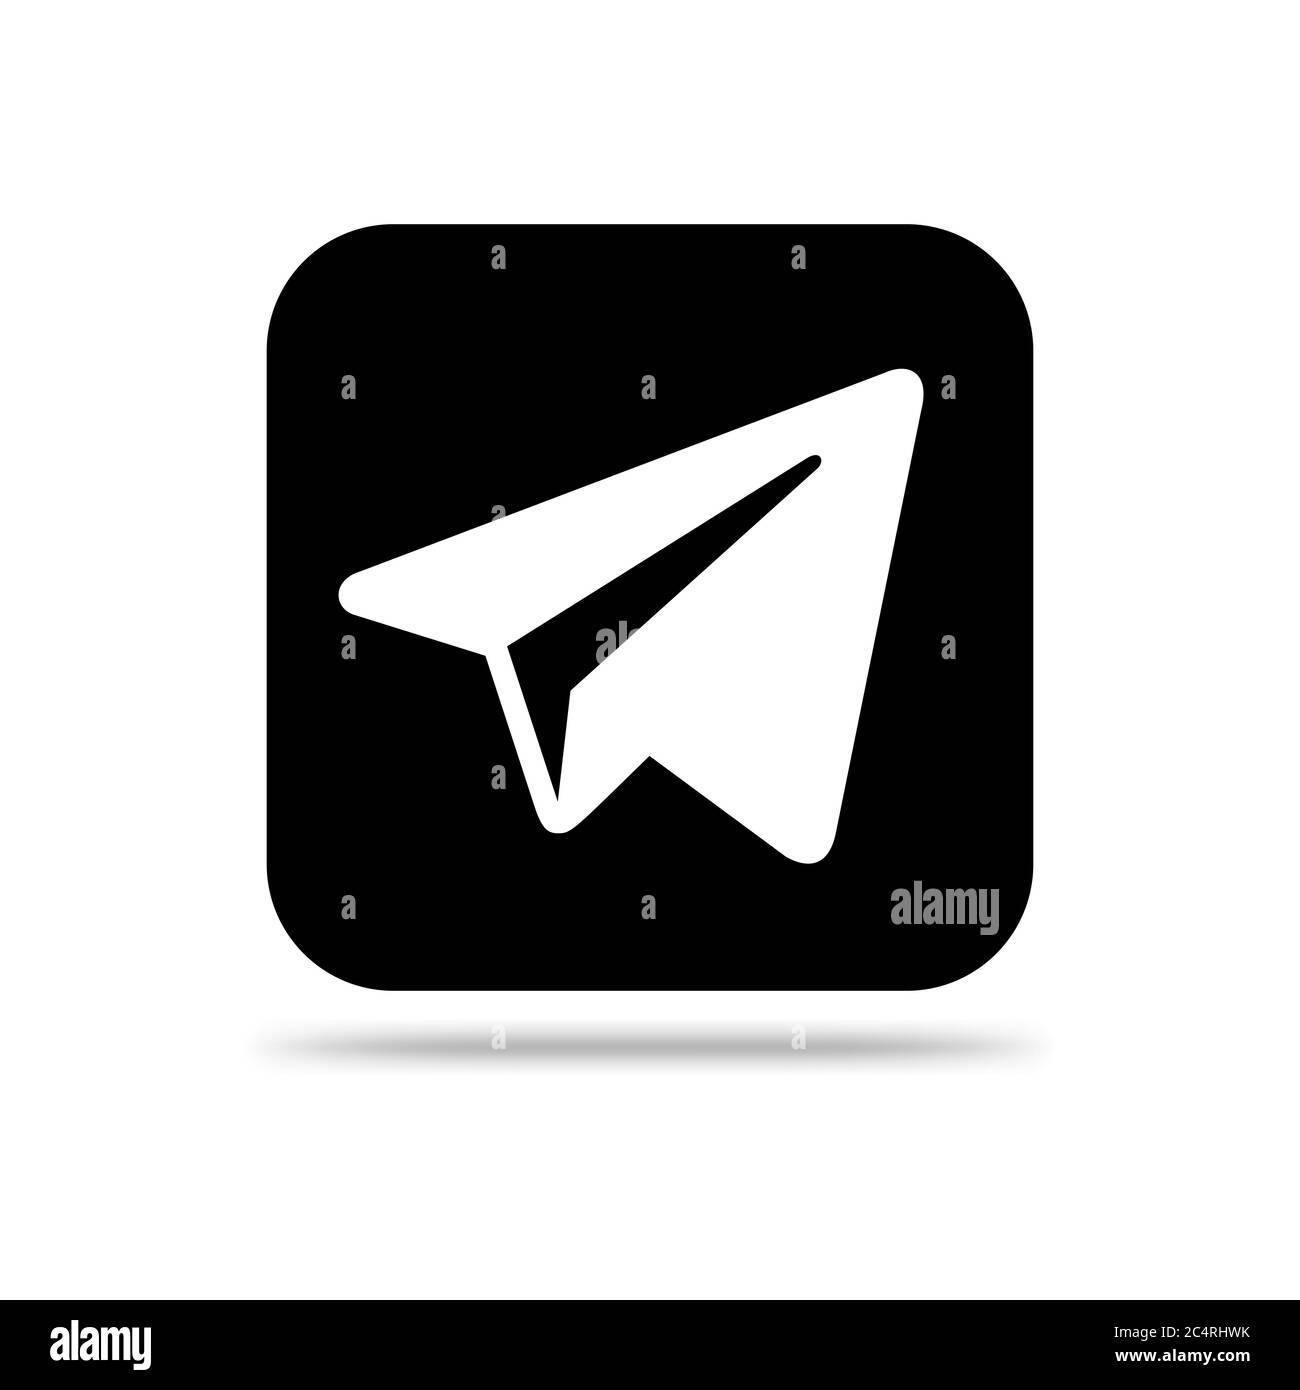 VORONEZH, RUSSIA - JANUARY 31, 2020: Telegram logo black square icon with shadow Stock Vector